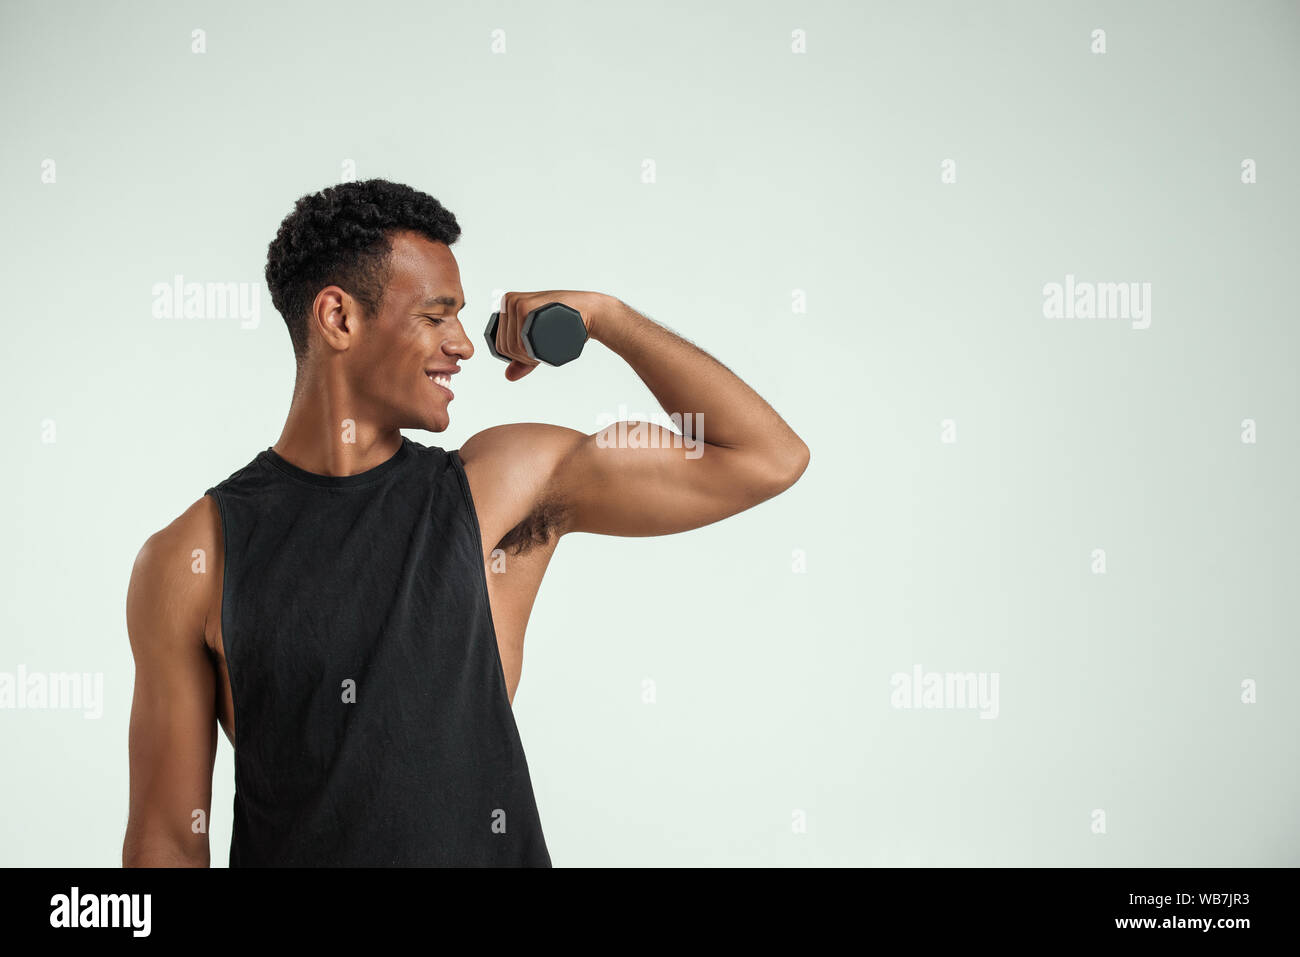 Making perfect body. Muscular young african man exercising with dumbbells and smiling while standing against grey background. Studio shot. Sport concept Stock Photo